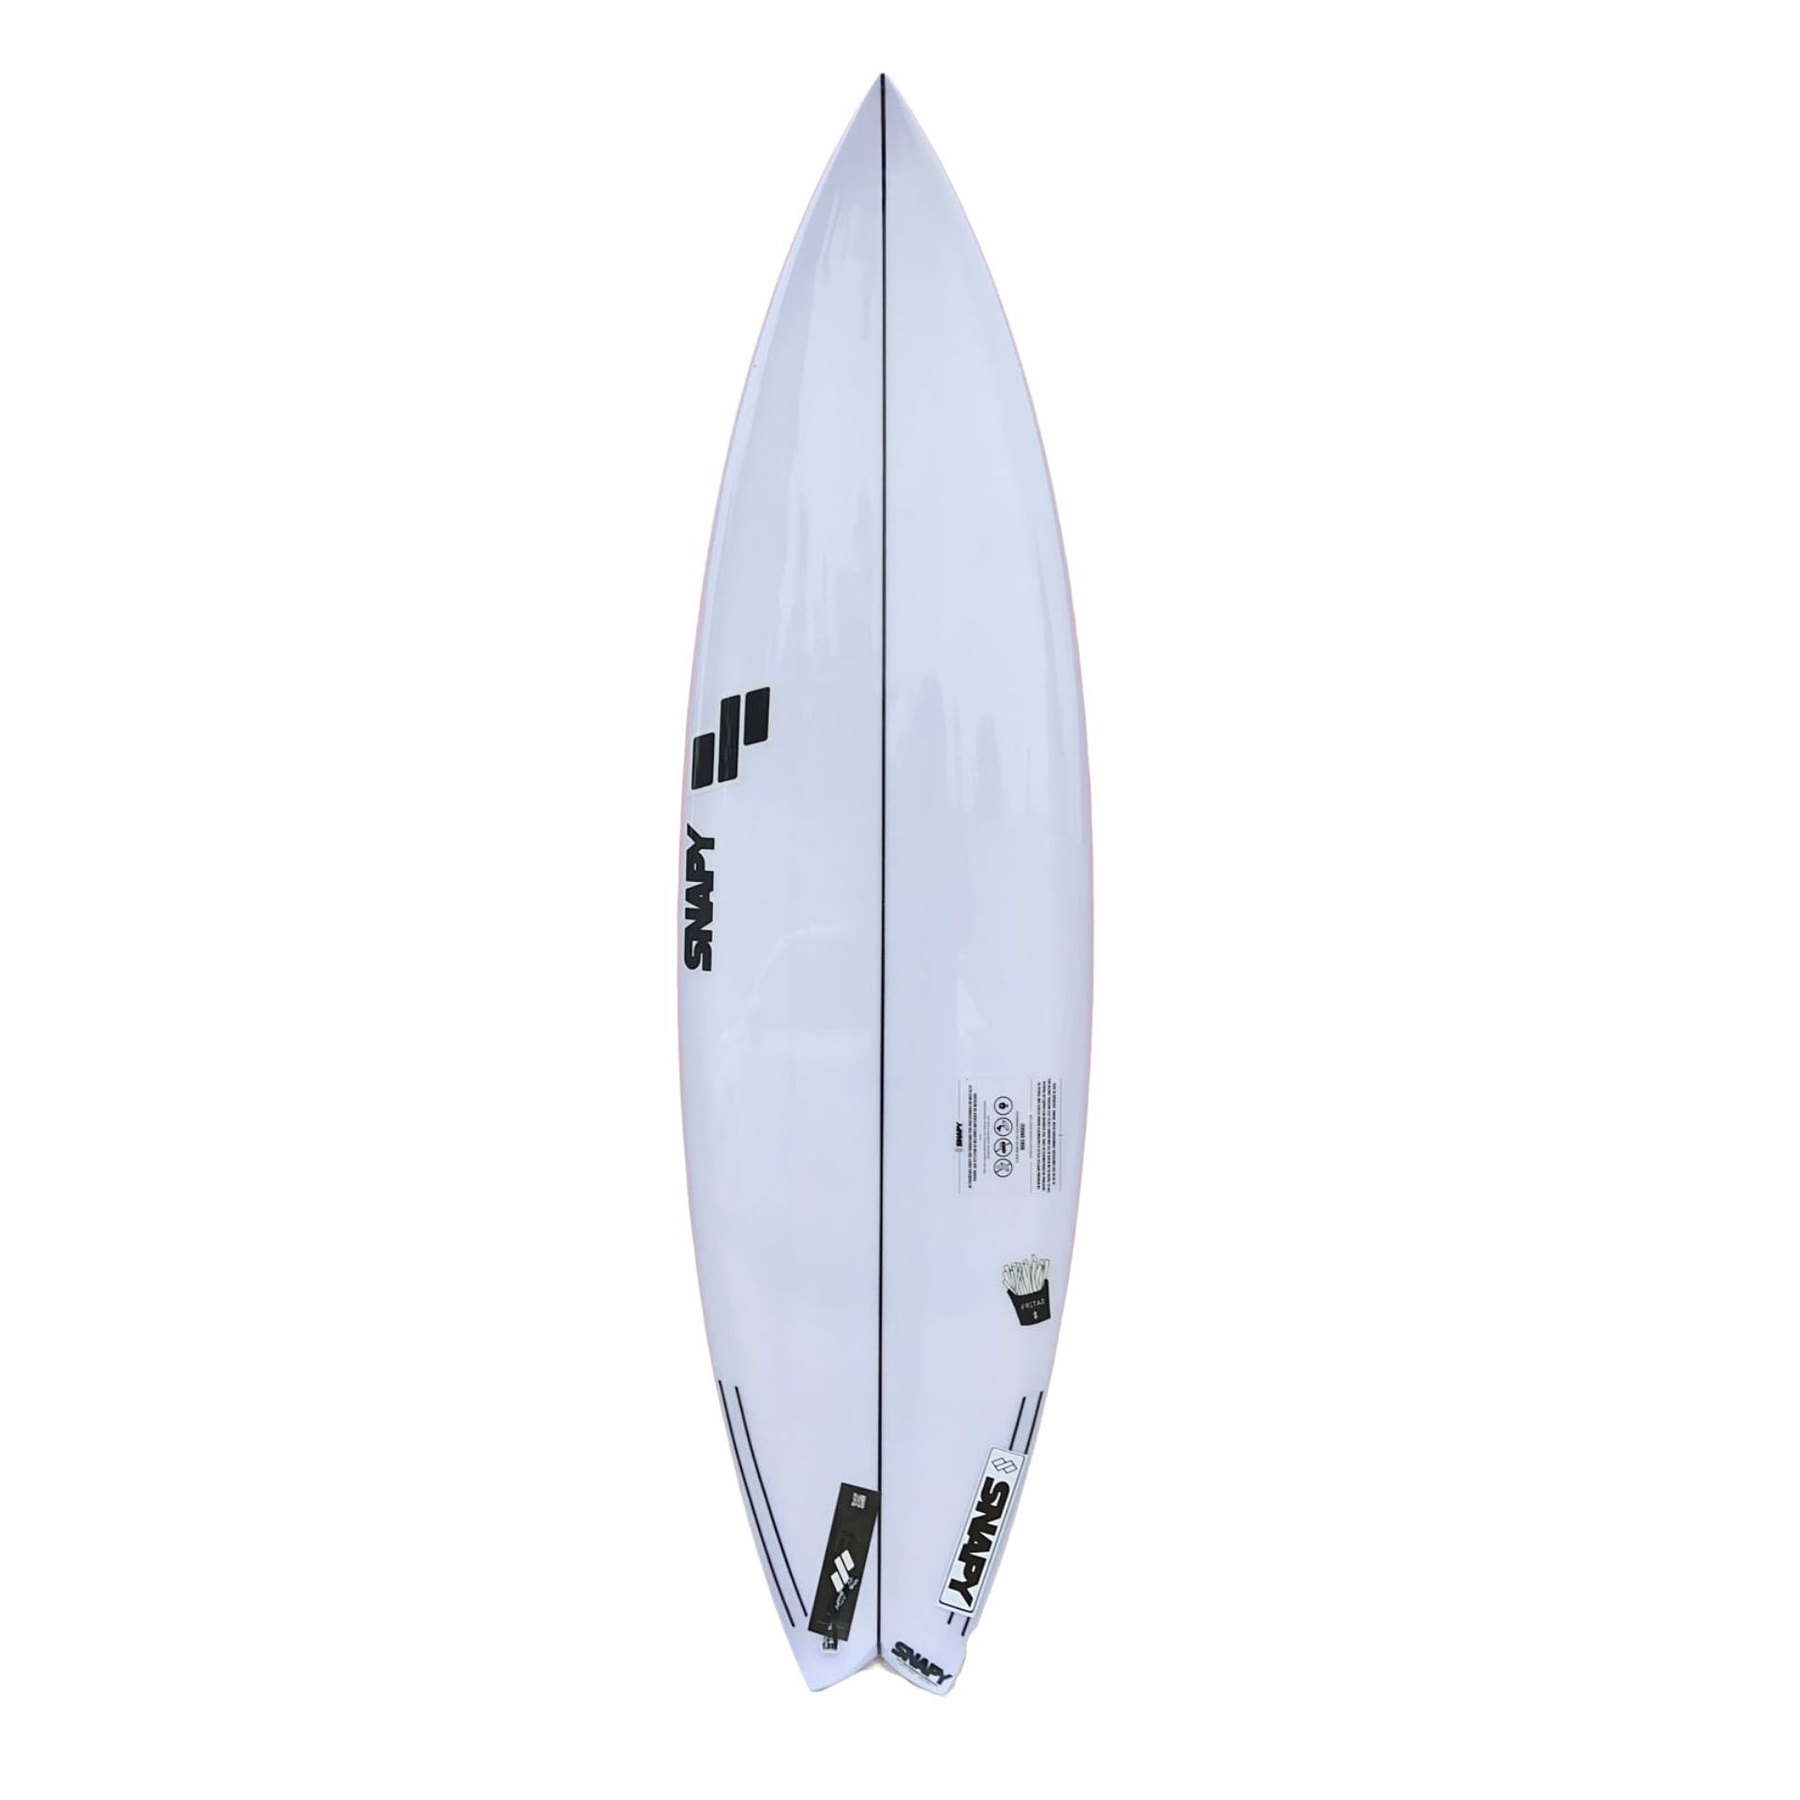 Surfboard Snapy Fritas 6'0 19,75 x 2,56 31,9 lts